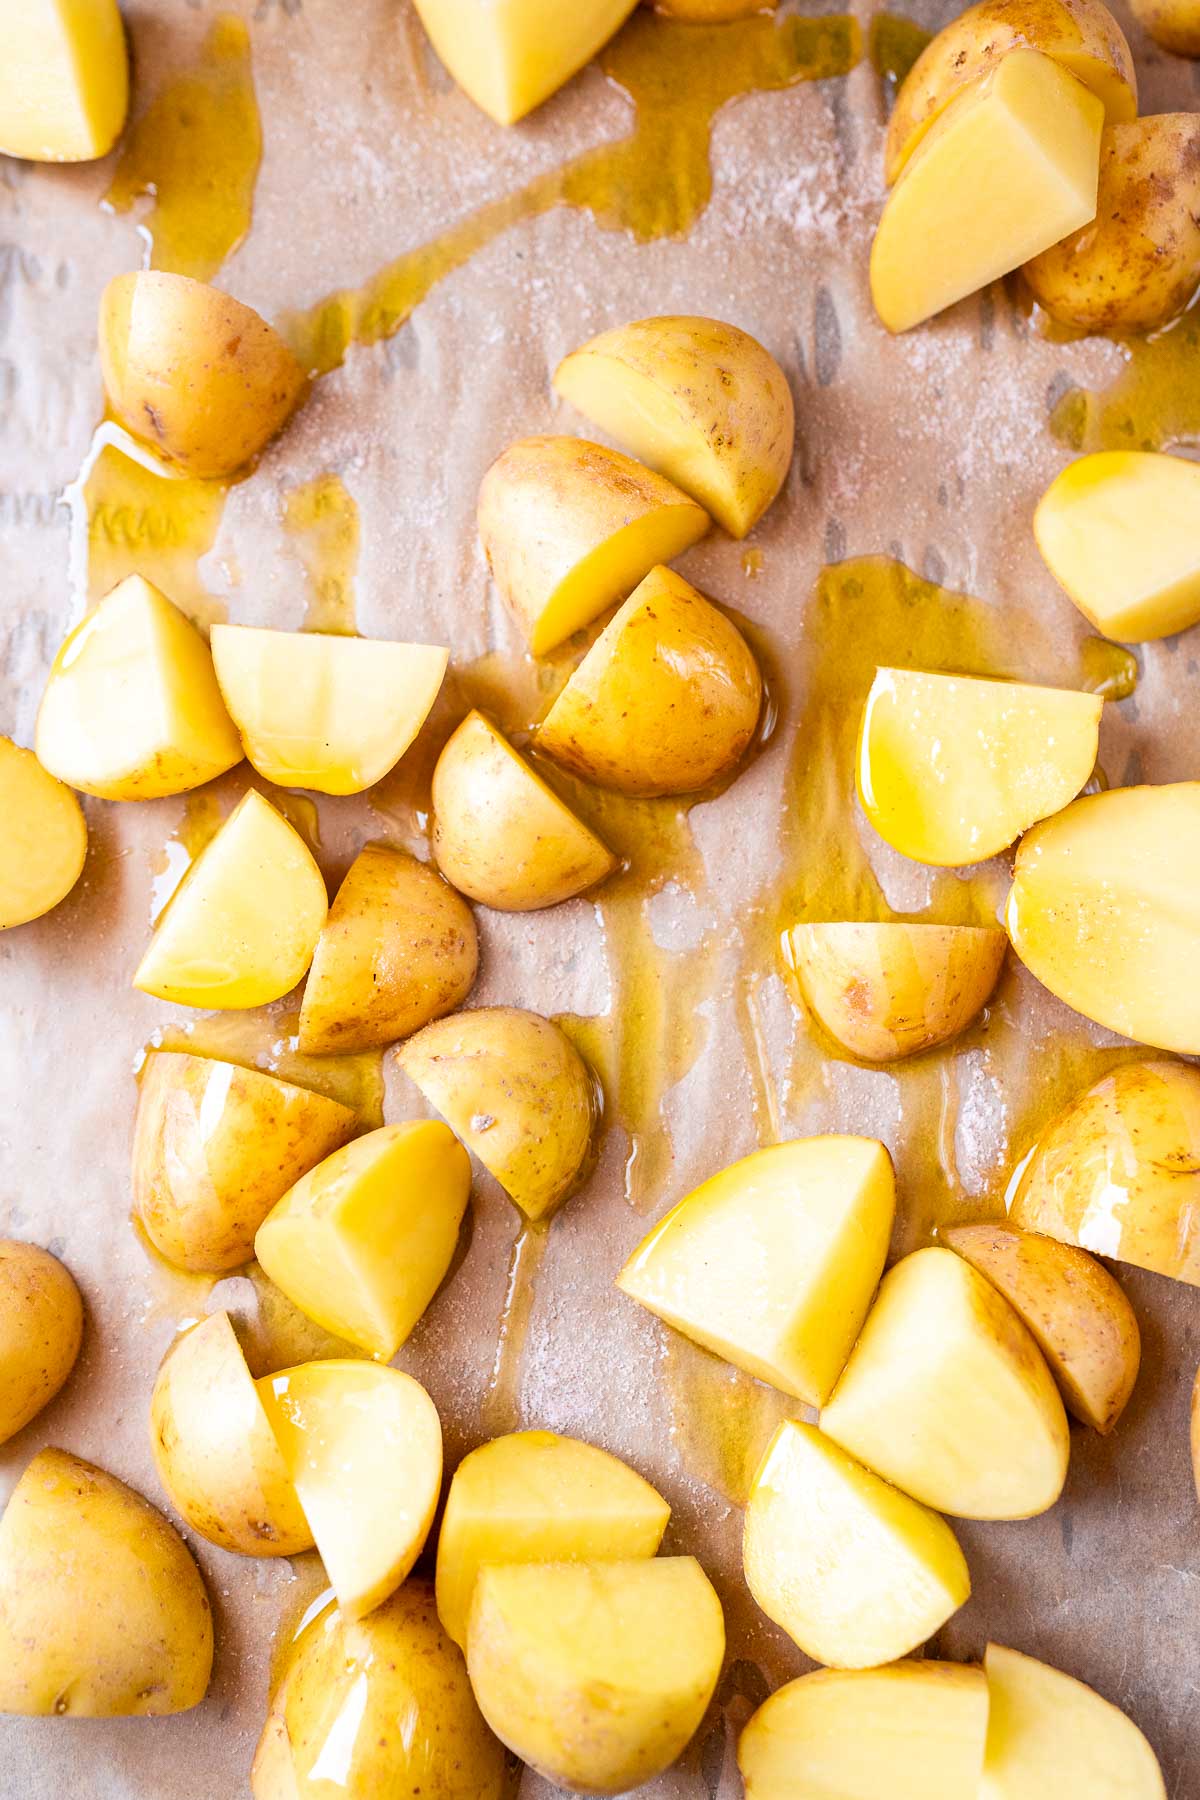 Quartered yellow potatoes drizzled with oil on a parchment lined baking sheet.